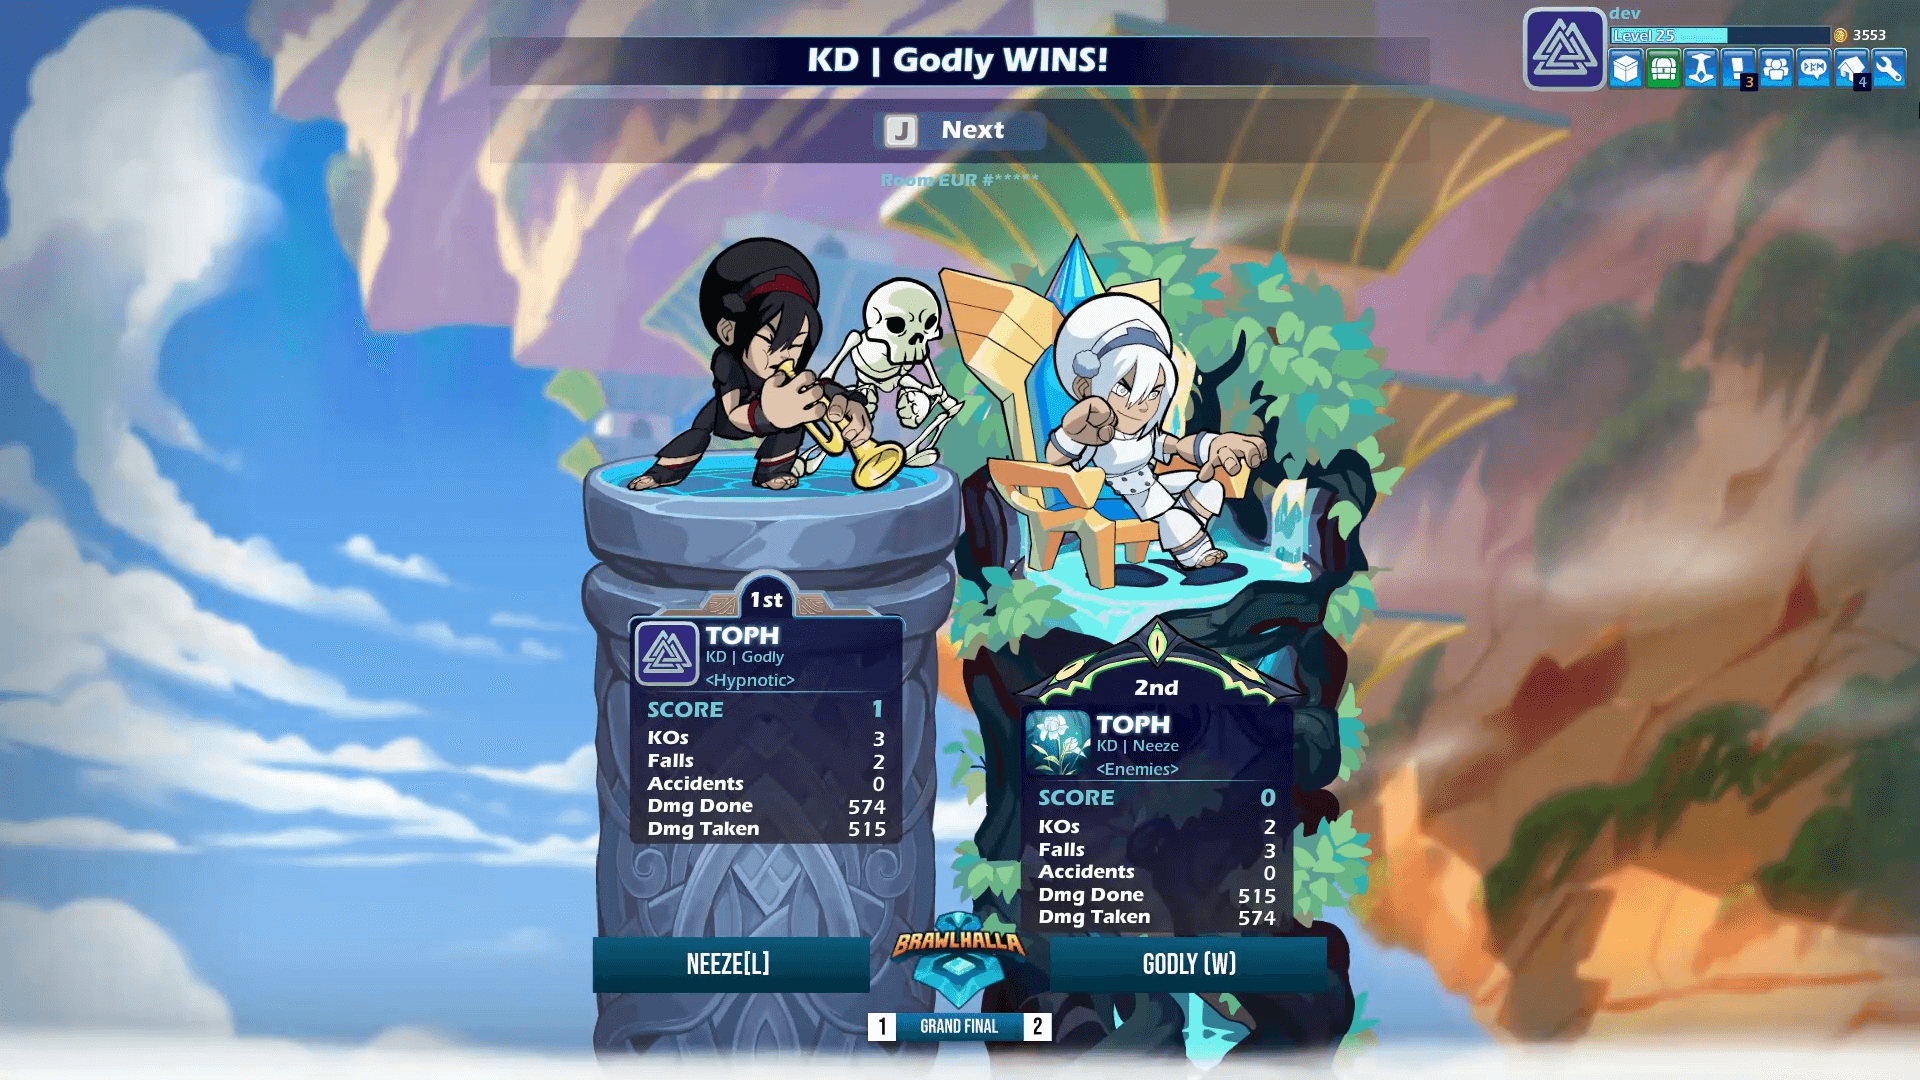 Pro Players Showcase Avatar Characters in Brawlhalla